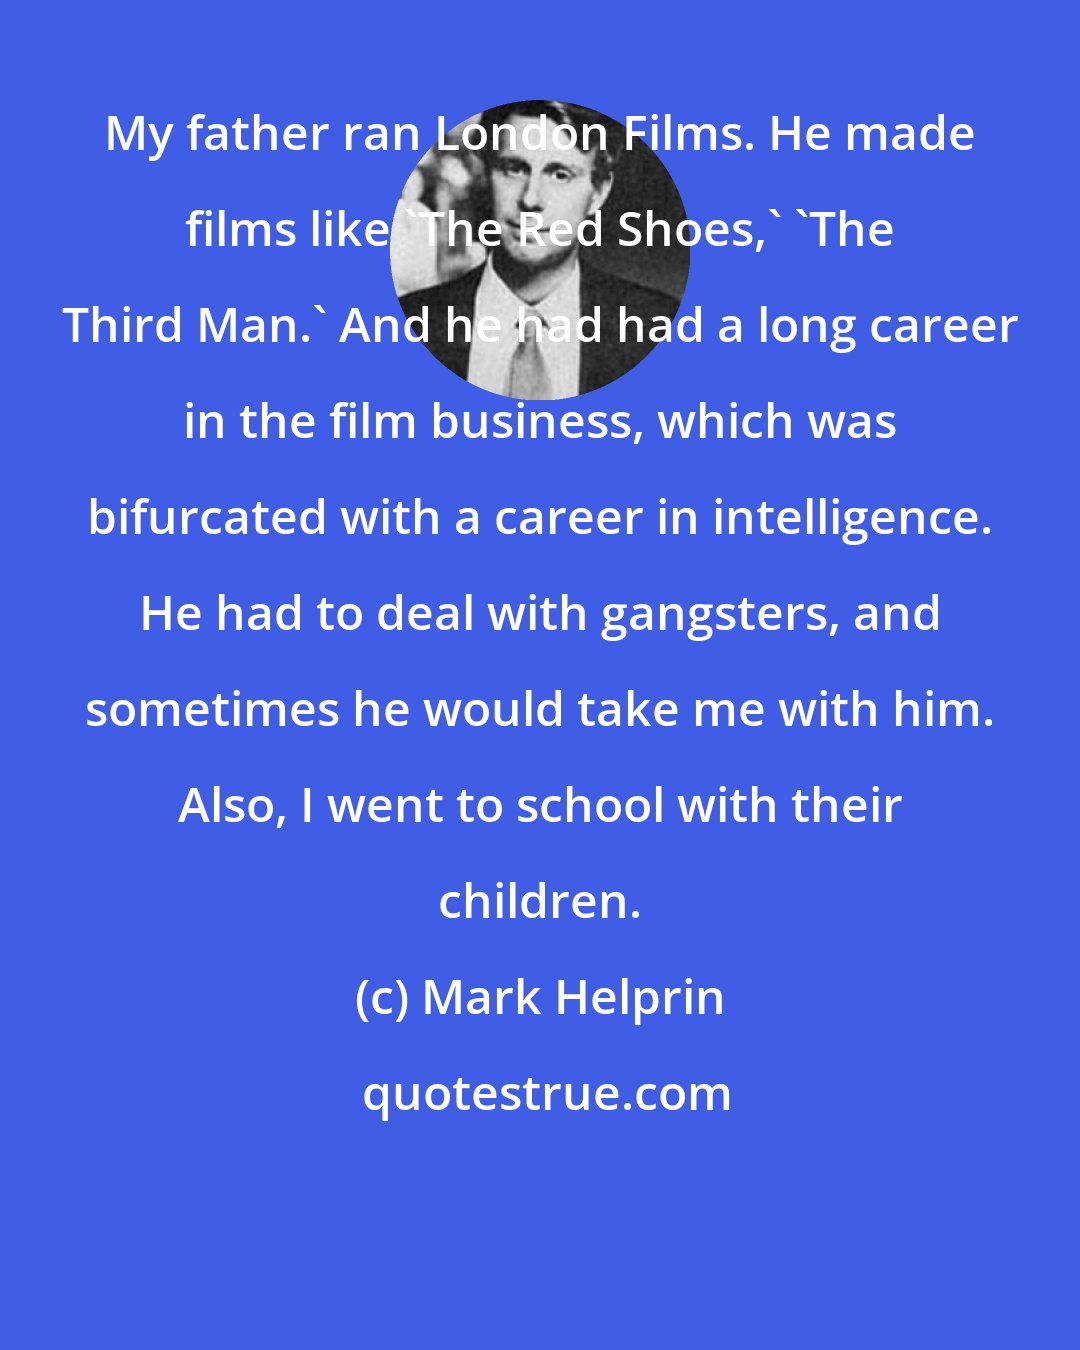 Mark Helprin: My father ran London Films. He made films like 'The Red Shoes,' 'The Third Man.' And he had had a long career in the film business, which was bifurcated with a career in intelligence. He had to deal with gangsters, and sometimes he would take me with him. Also, I went to school with their children.